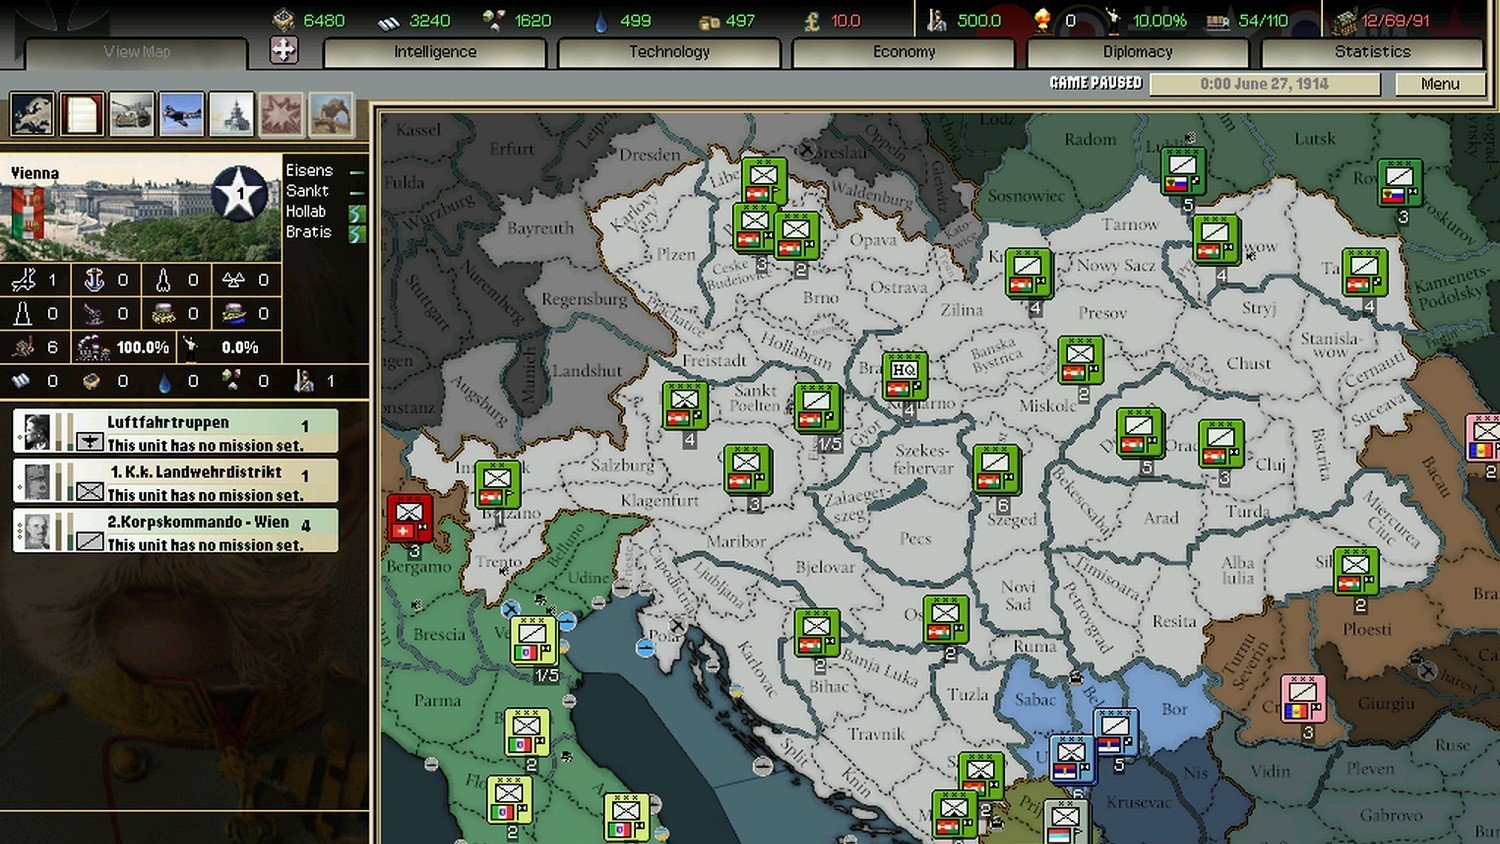 Best WW1 Strategy Games Hearts of Iron Darkest Hour screenhot showing various enemy territories on a map.